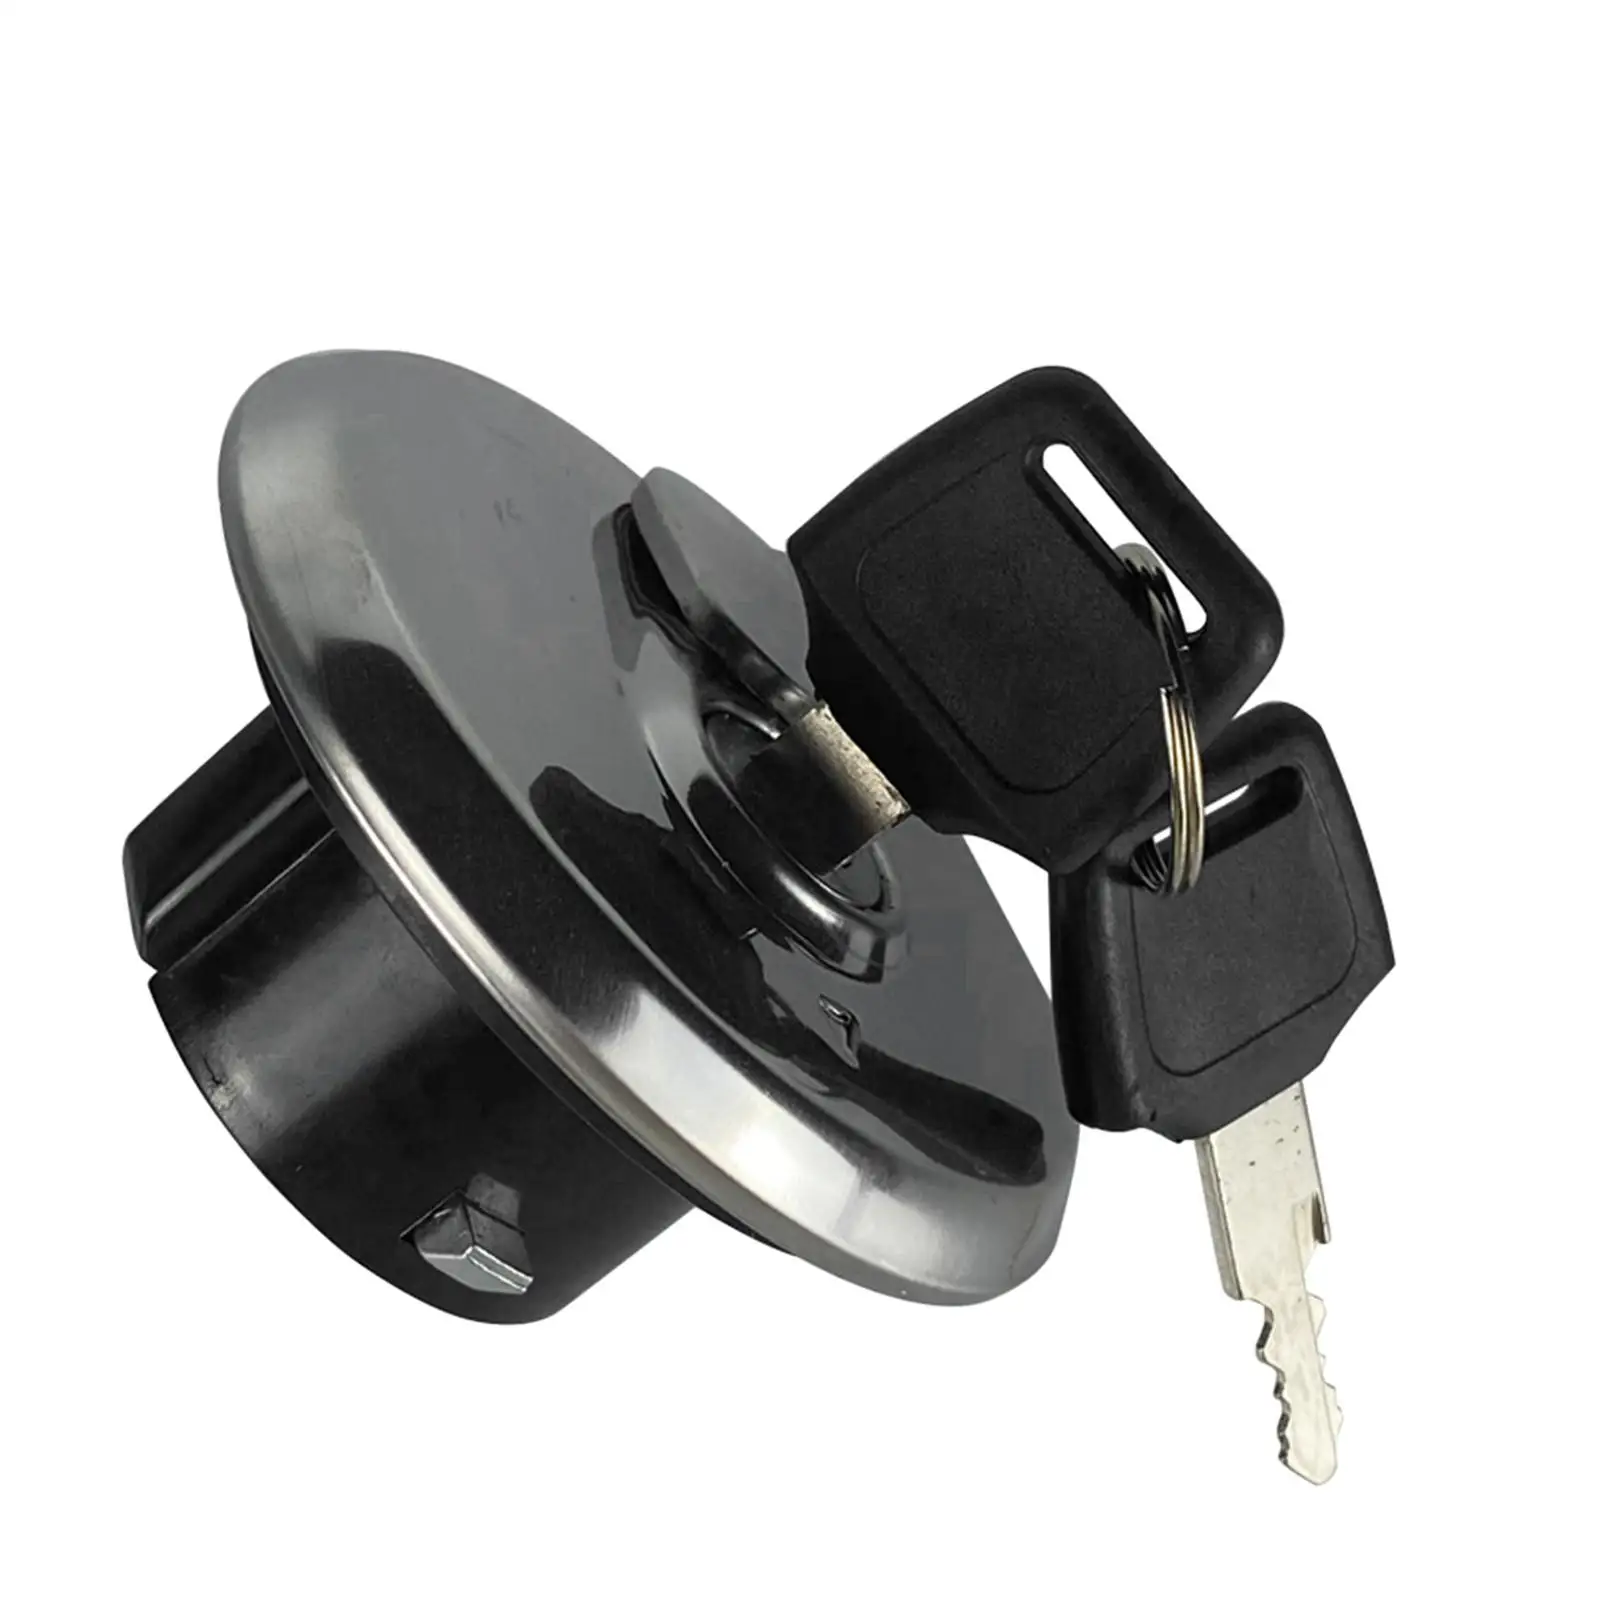 Motorbike Fuel Gas Tank Cap Cover with Lock Keys Replaces for Suzuki Gn125 High Performance Supplies Accessories Parts